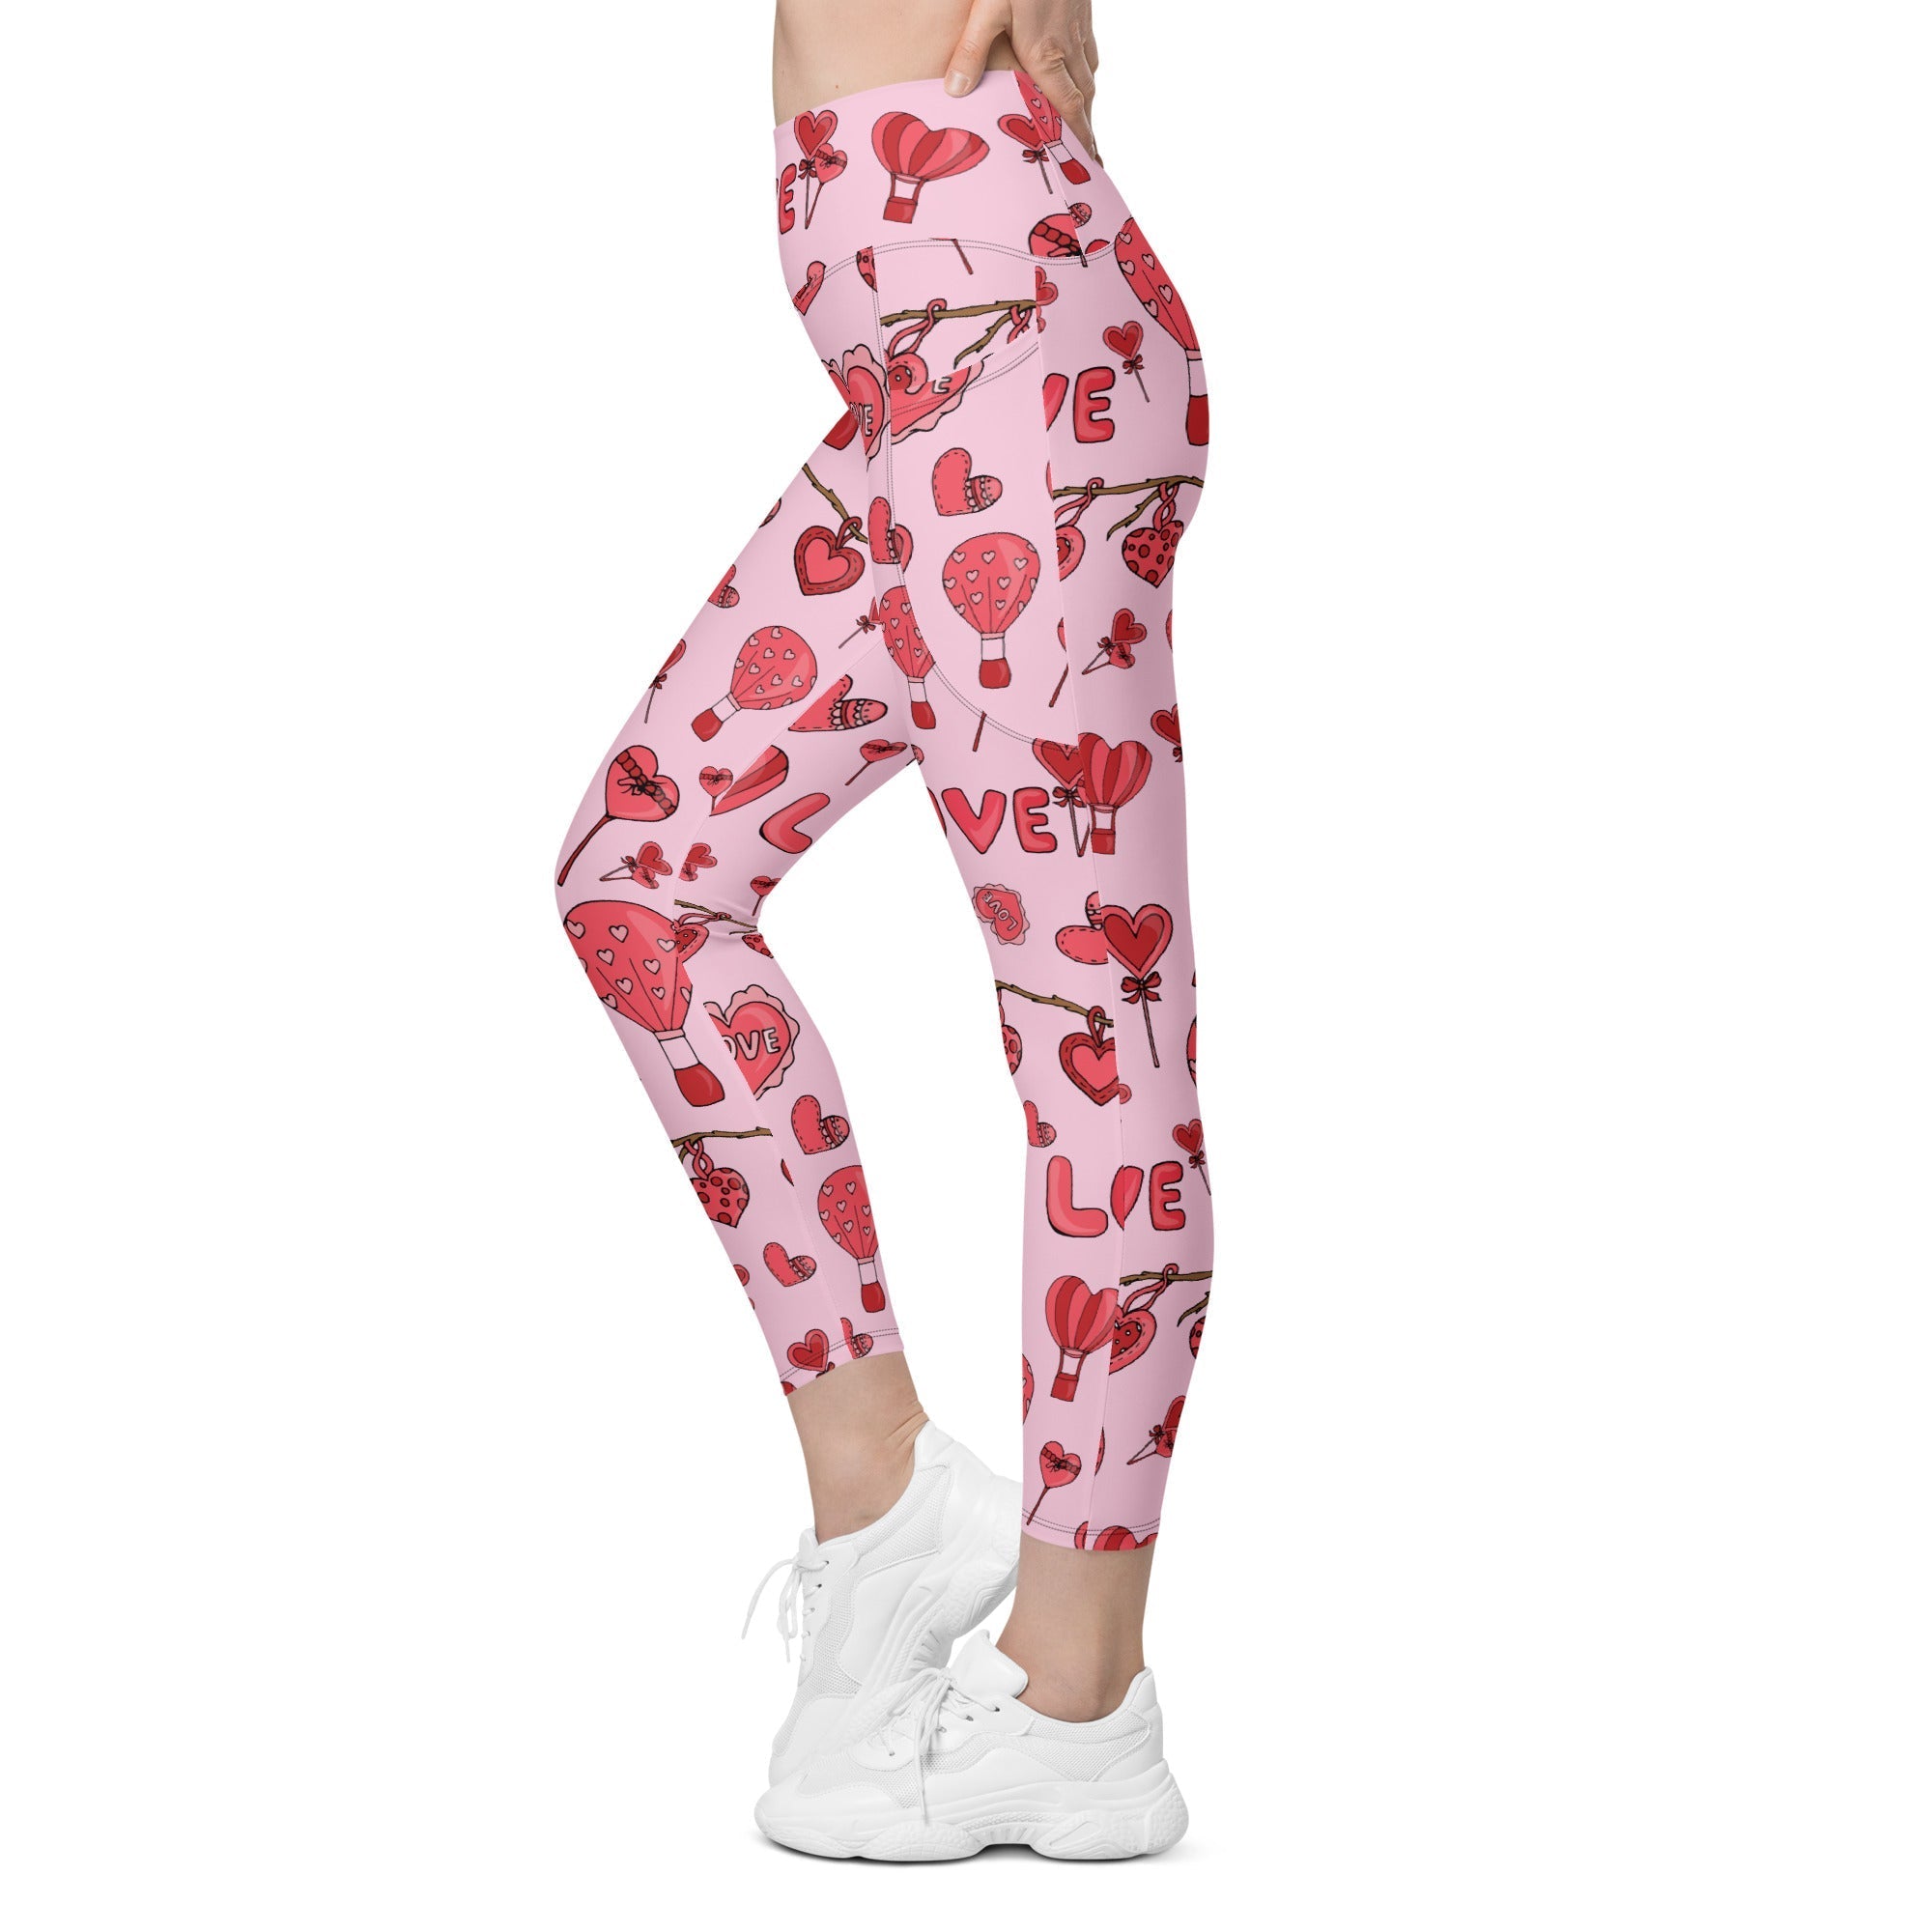 Pink Love Leggings With Pockets